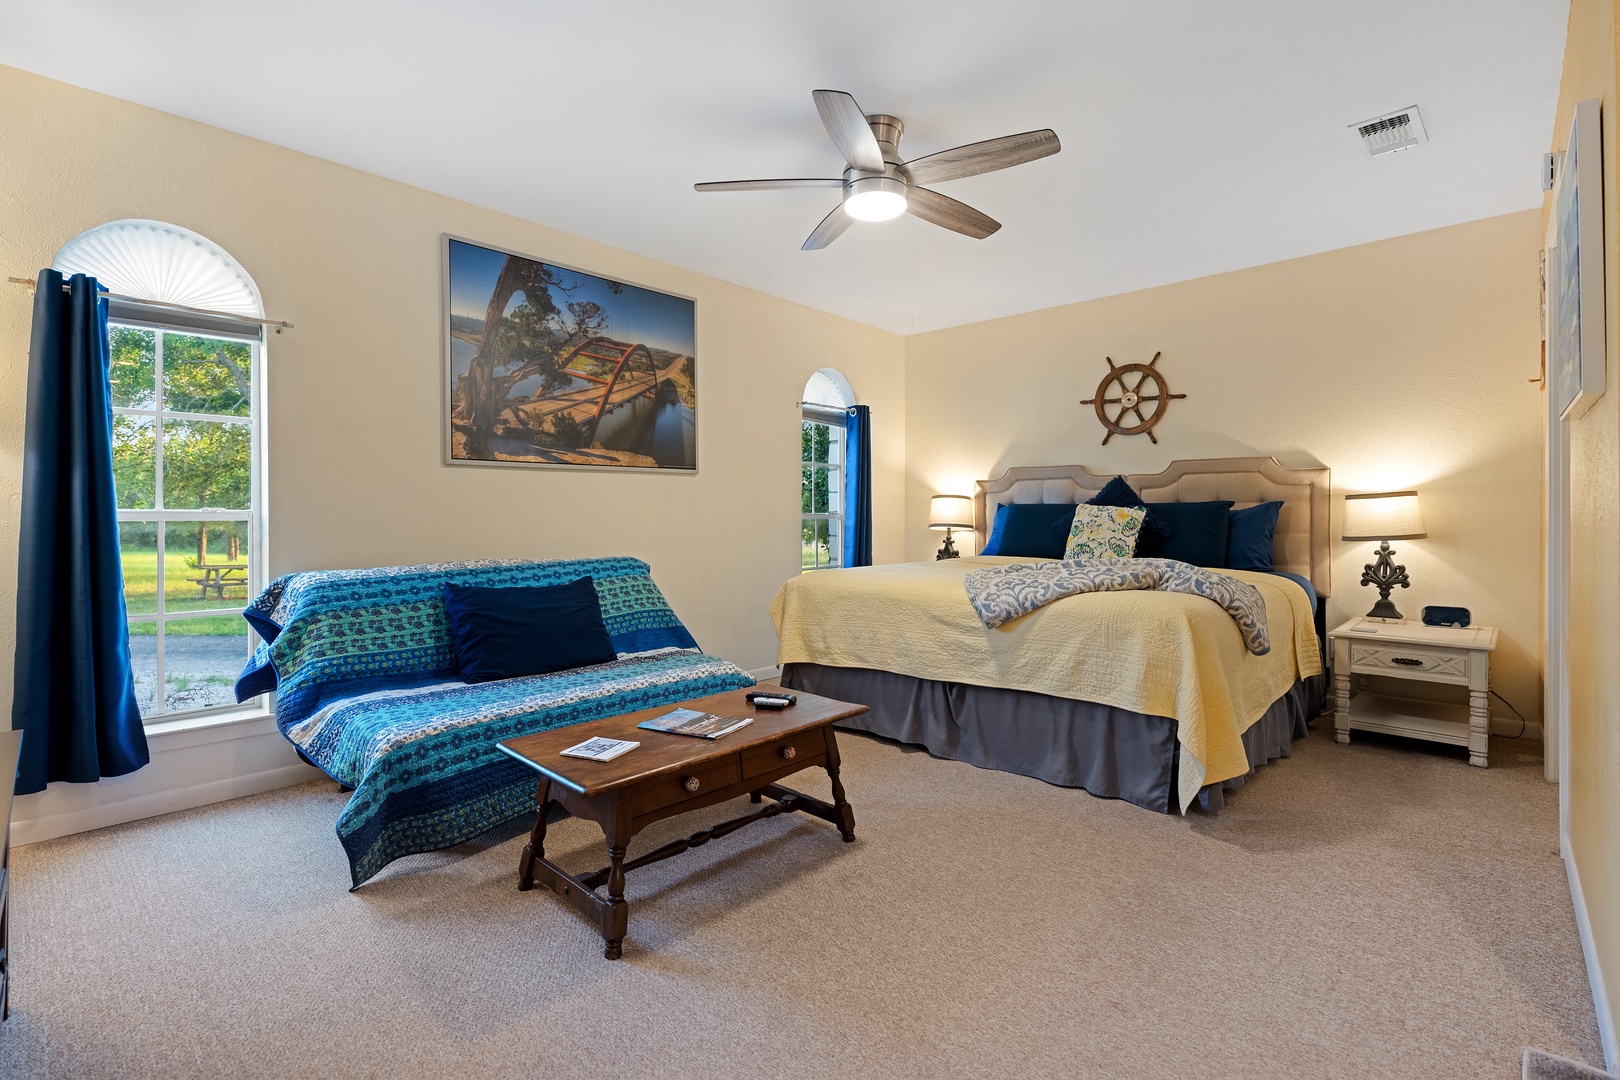 The casita offers a comfortable king bed, private bathroom, and Smart TV